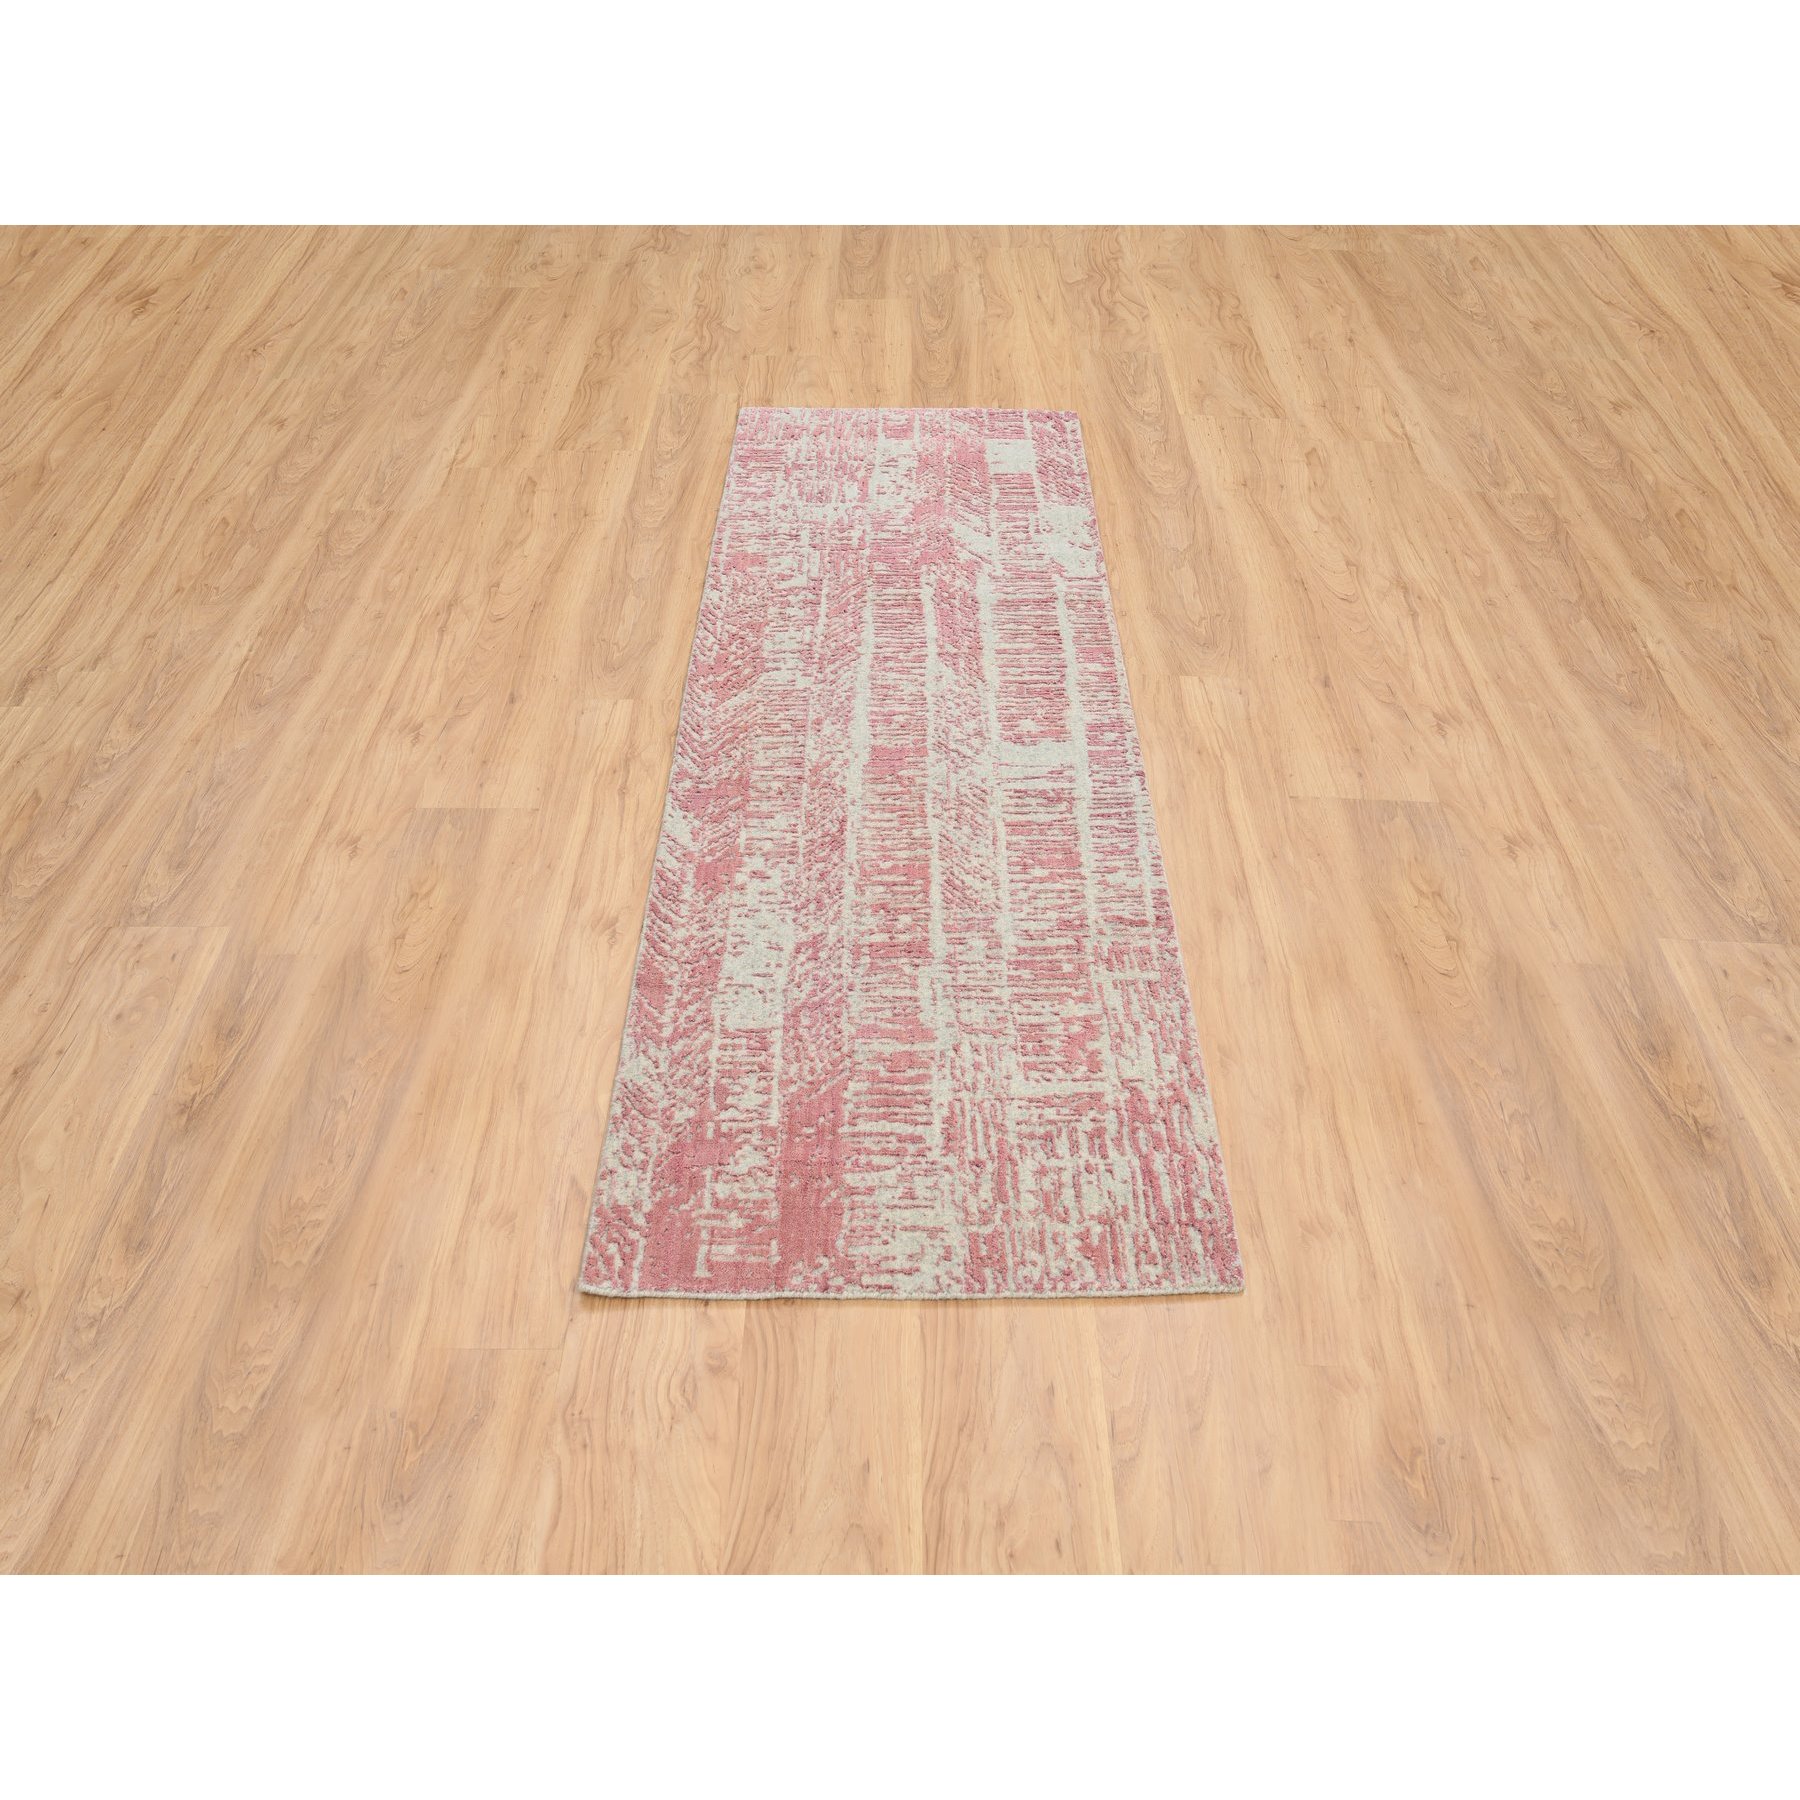 2'6"x8' Rose Pink, All Over Design Wool and Art Silk, Jacquard Hand Loomed, Runner Oriental Rug 